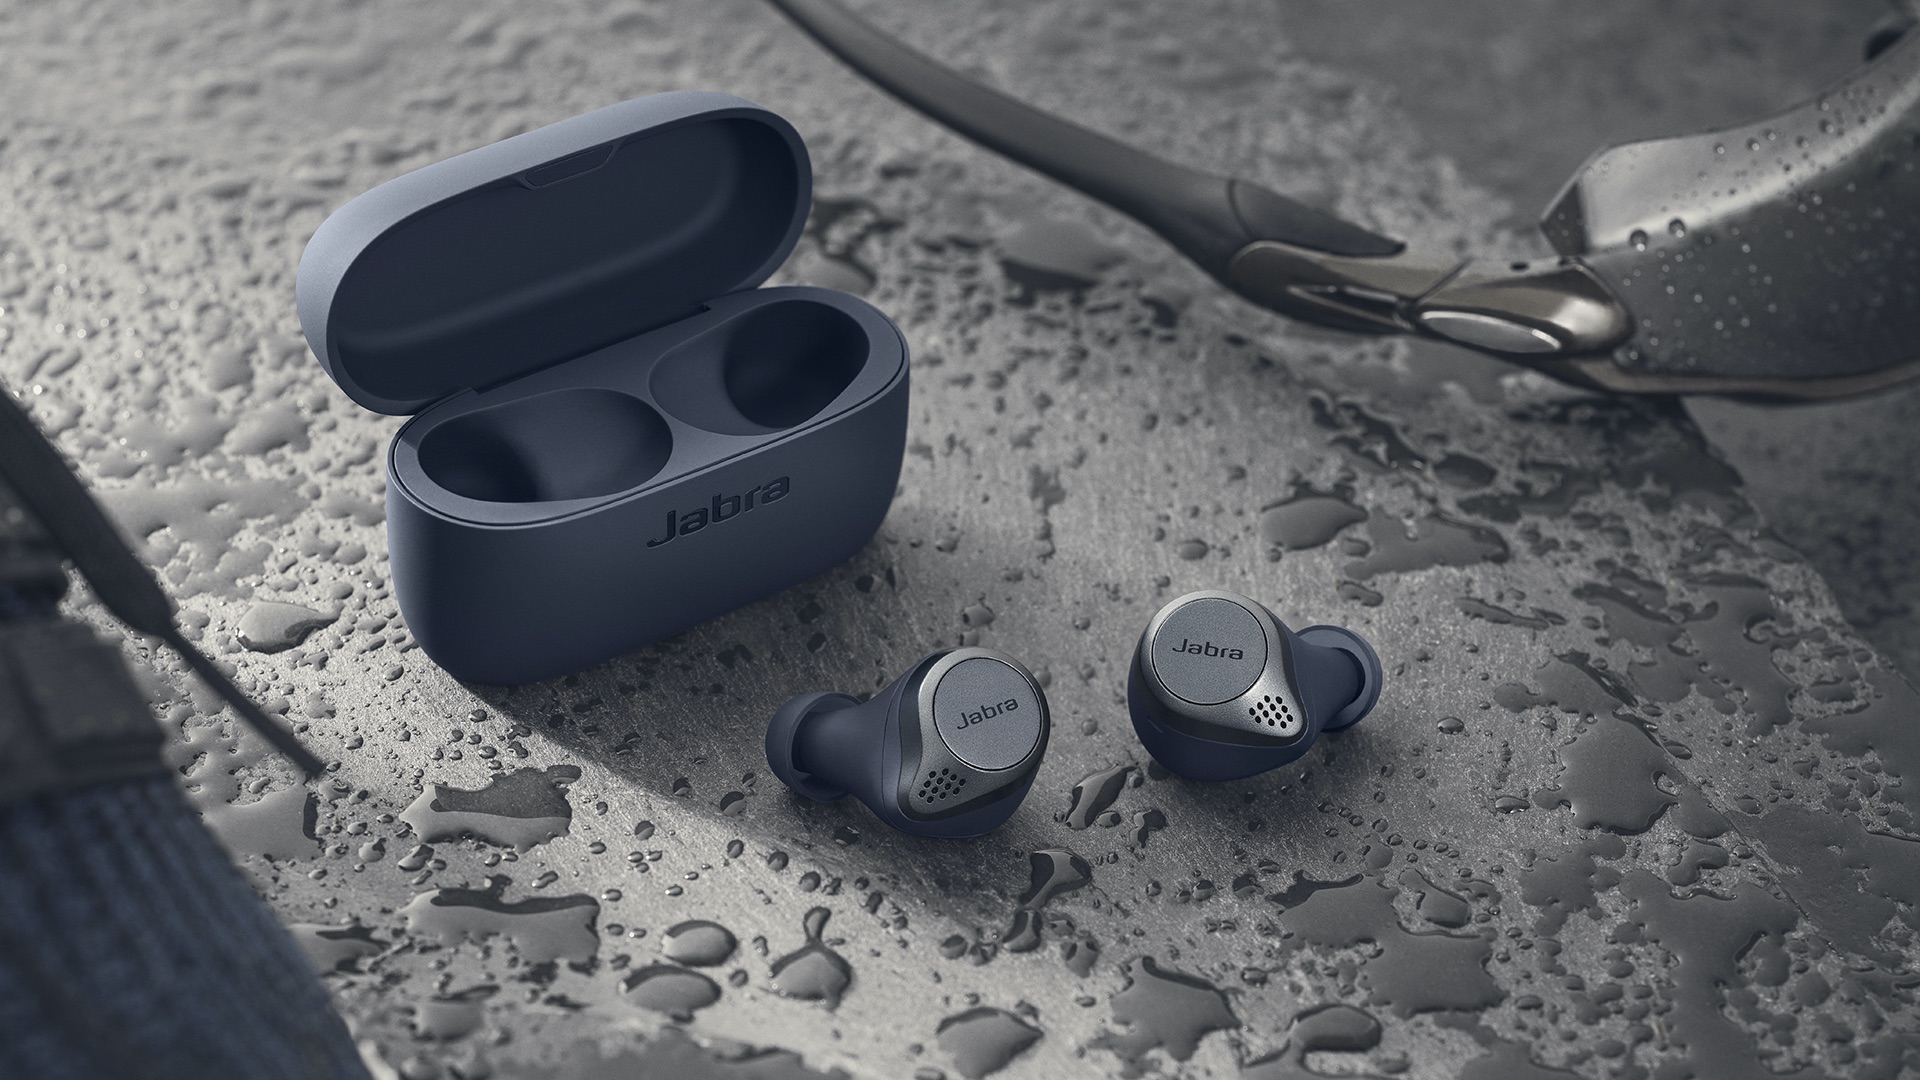 Review: Jabra Elite Active 75t | Superior Workout Earbuds